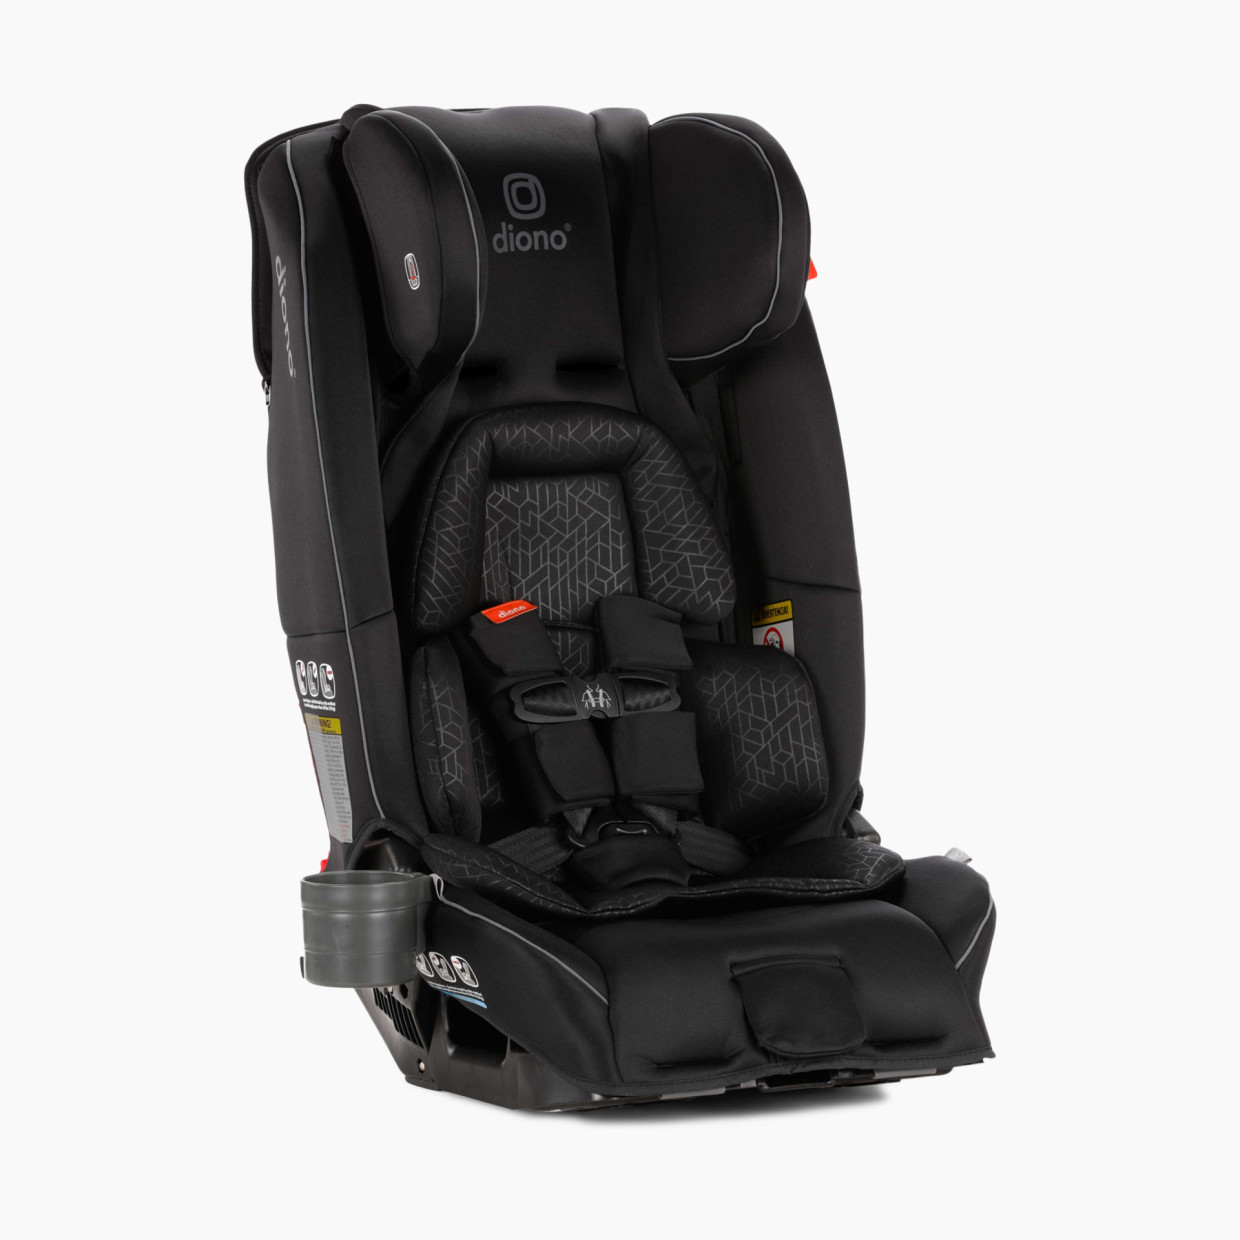 Diono Radian 3 RXT All-In-One Convertible Car Seat - Black.